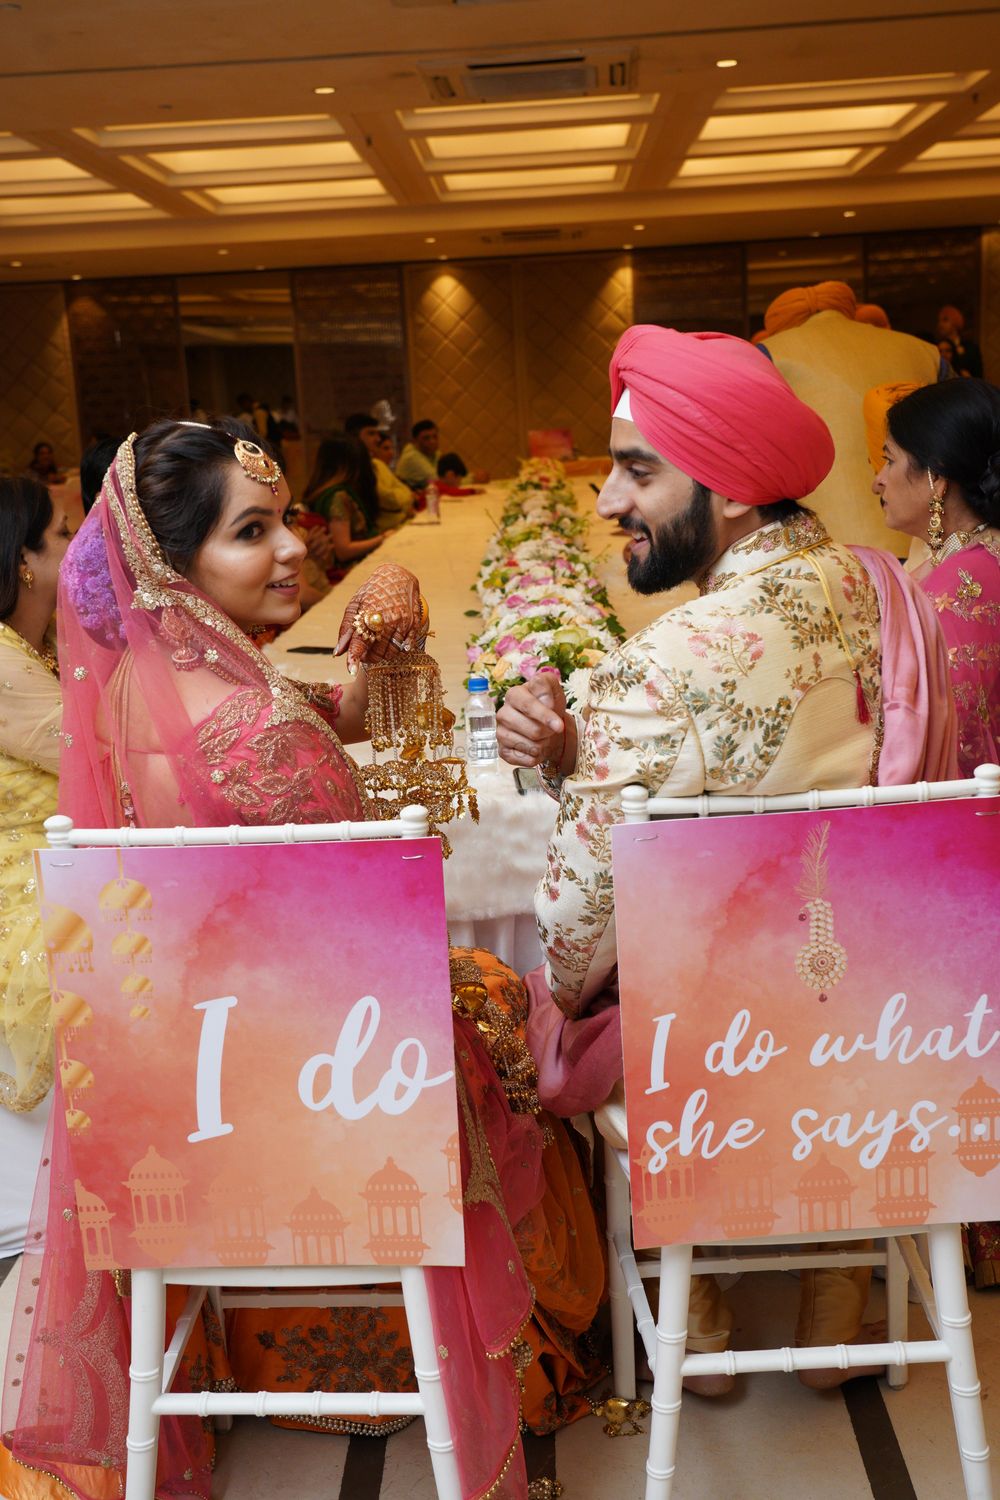 Photo By Gātha - A Tale of Events - Wedding Planners